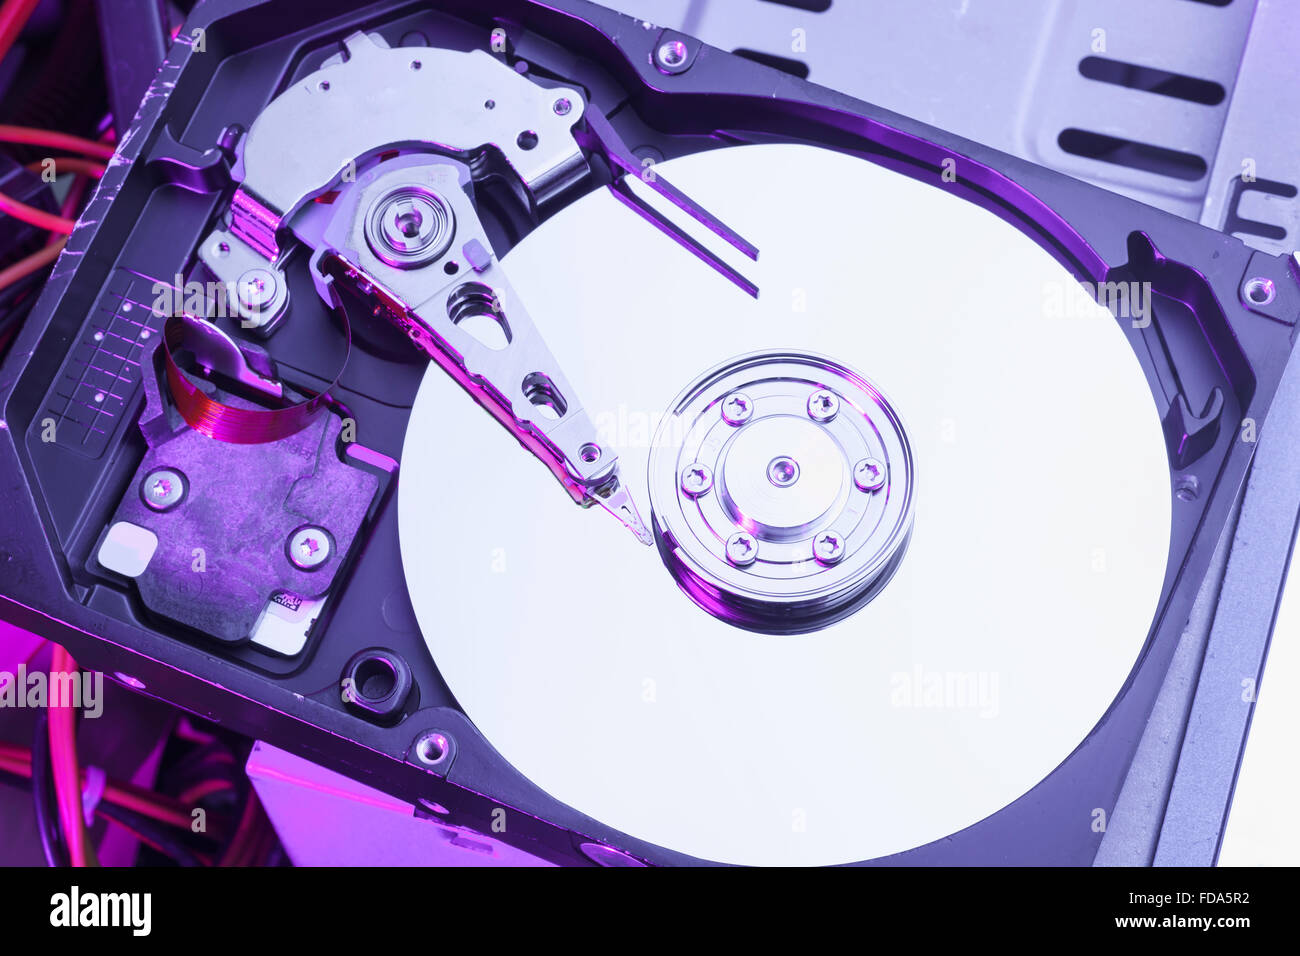 Top view of hard disk drive disassembled Stock Photo